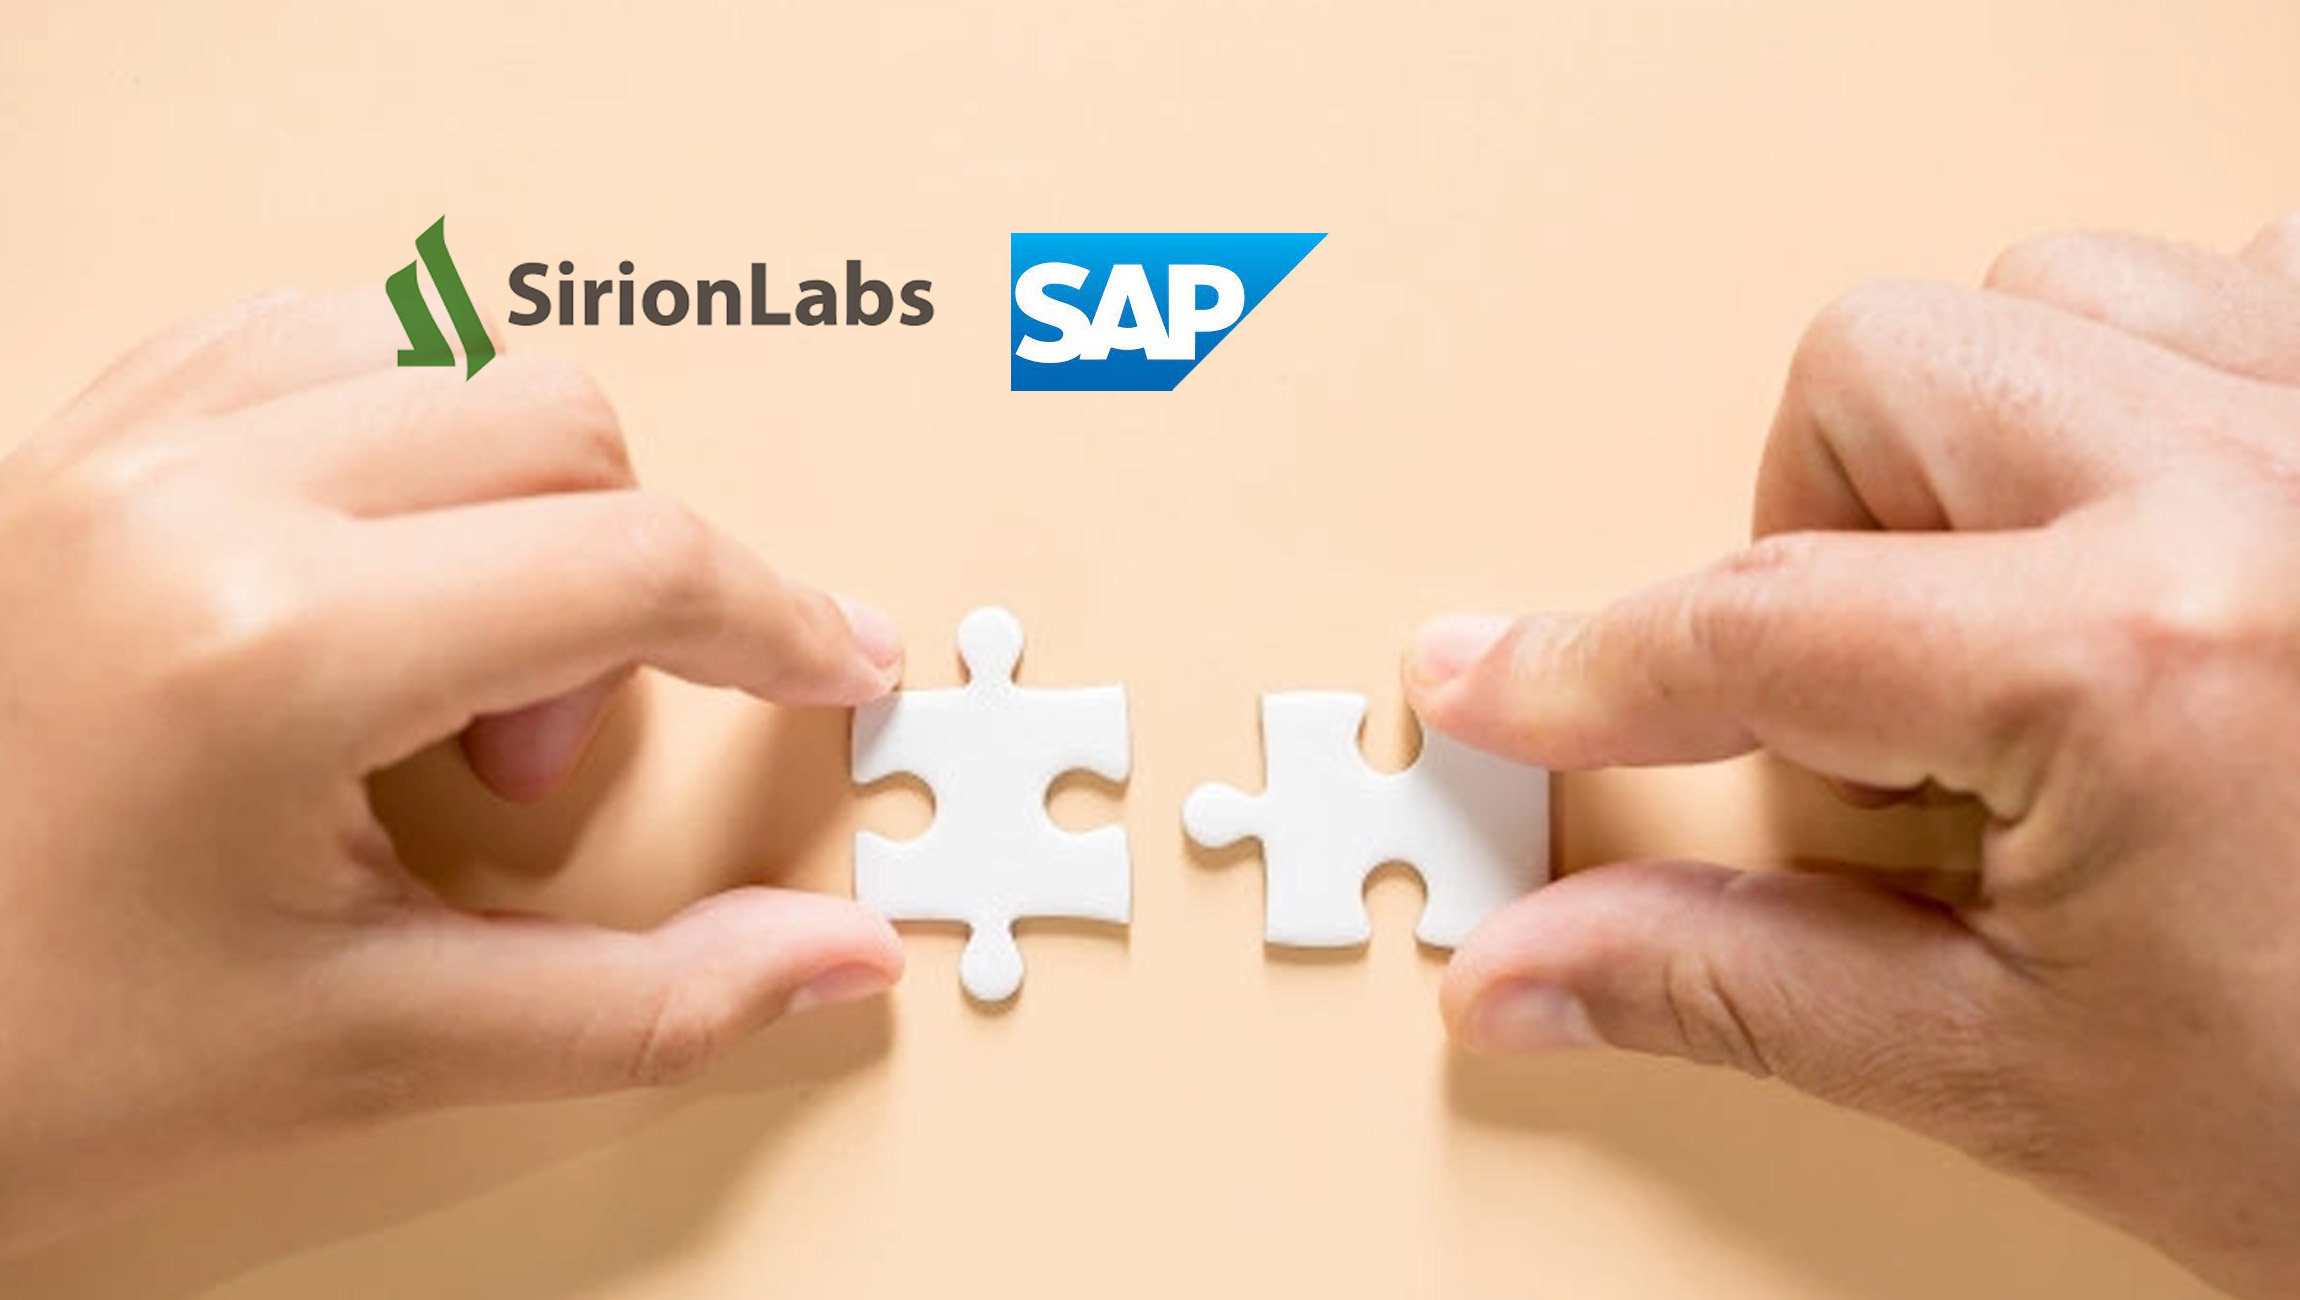 SirionOne 2.59.01 CLM Platform by SirionLabs is Certified by SAP as Integrated With SAP S/4HANA